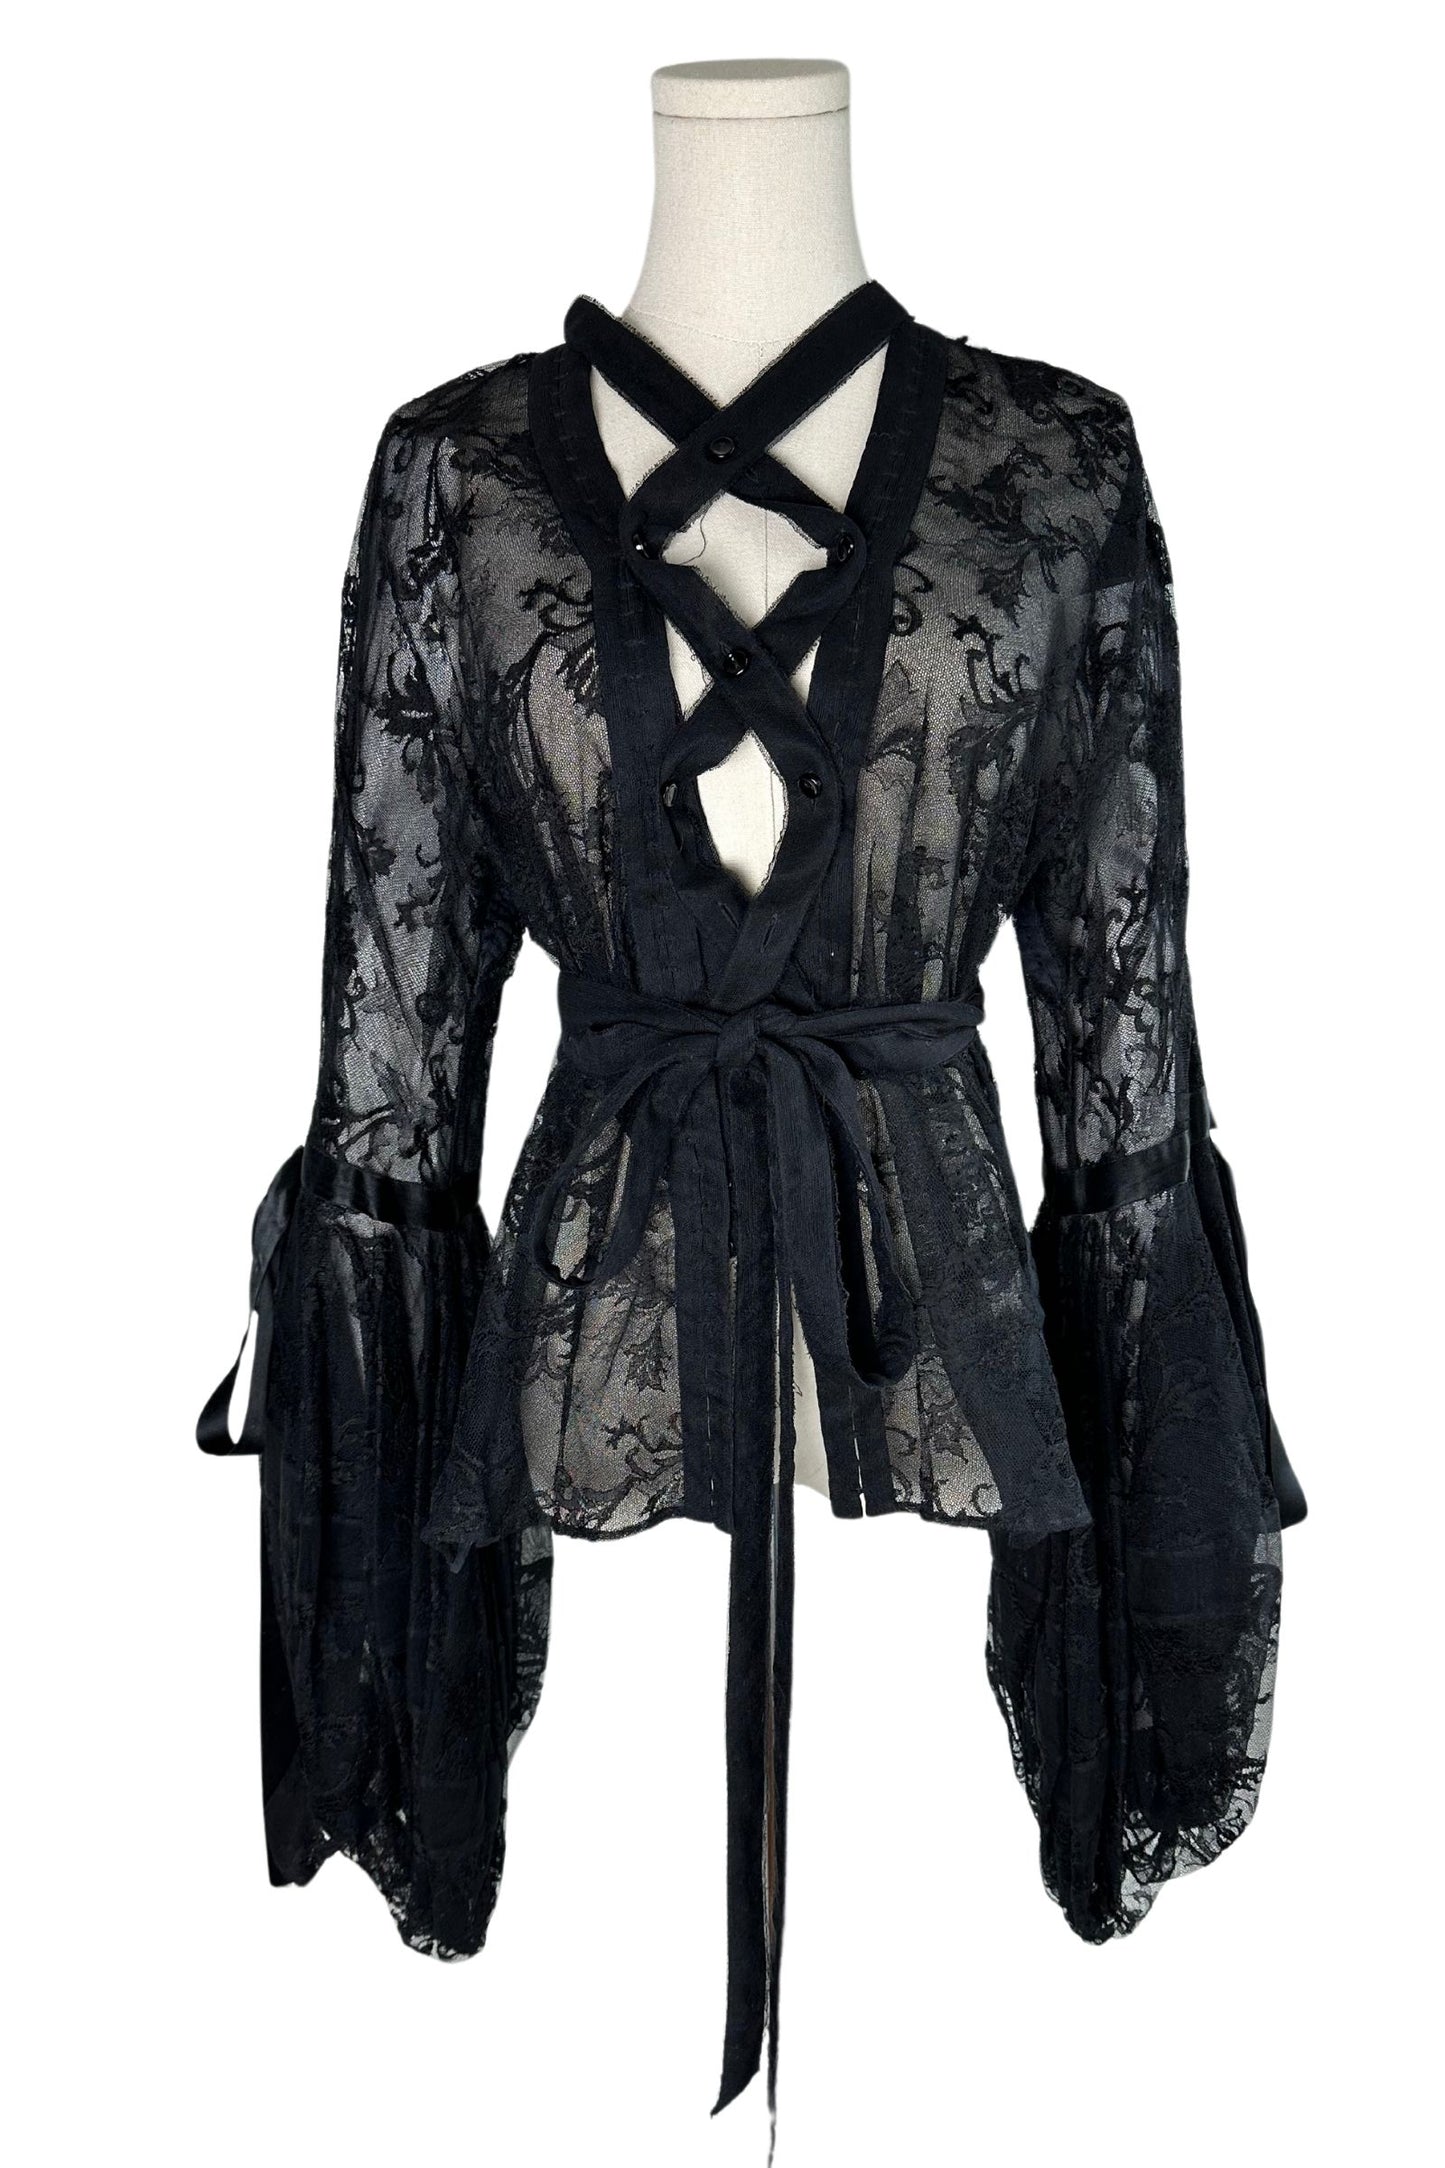 Yves Saint Laurent by Tom Ford F/W 2002 Runway Sheer Black Lace Corset Plunging Blouse Size S/M